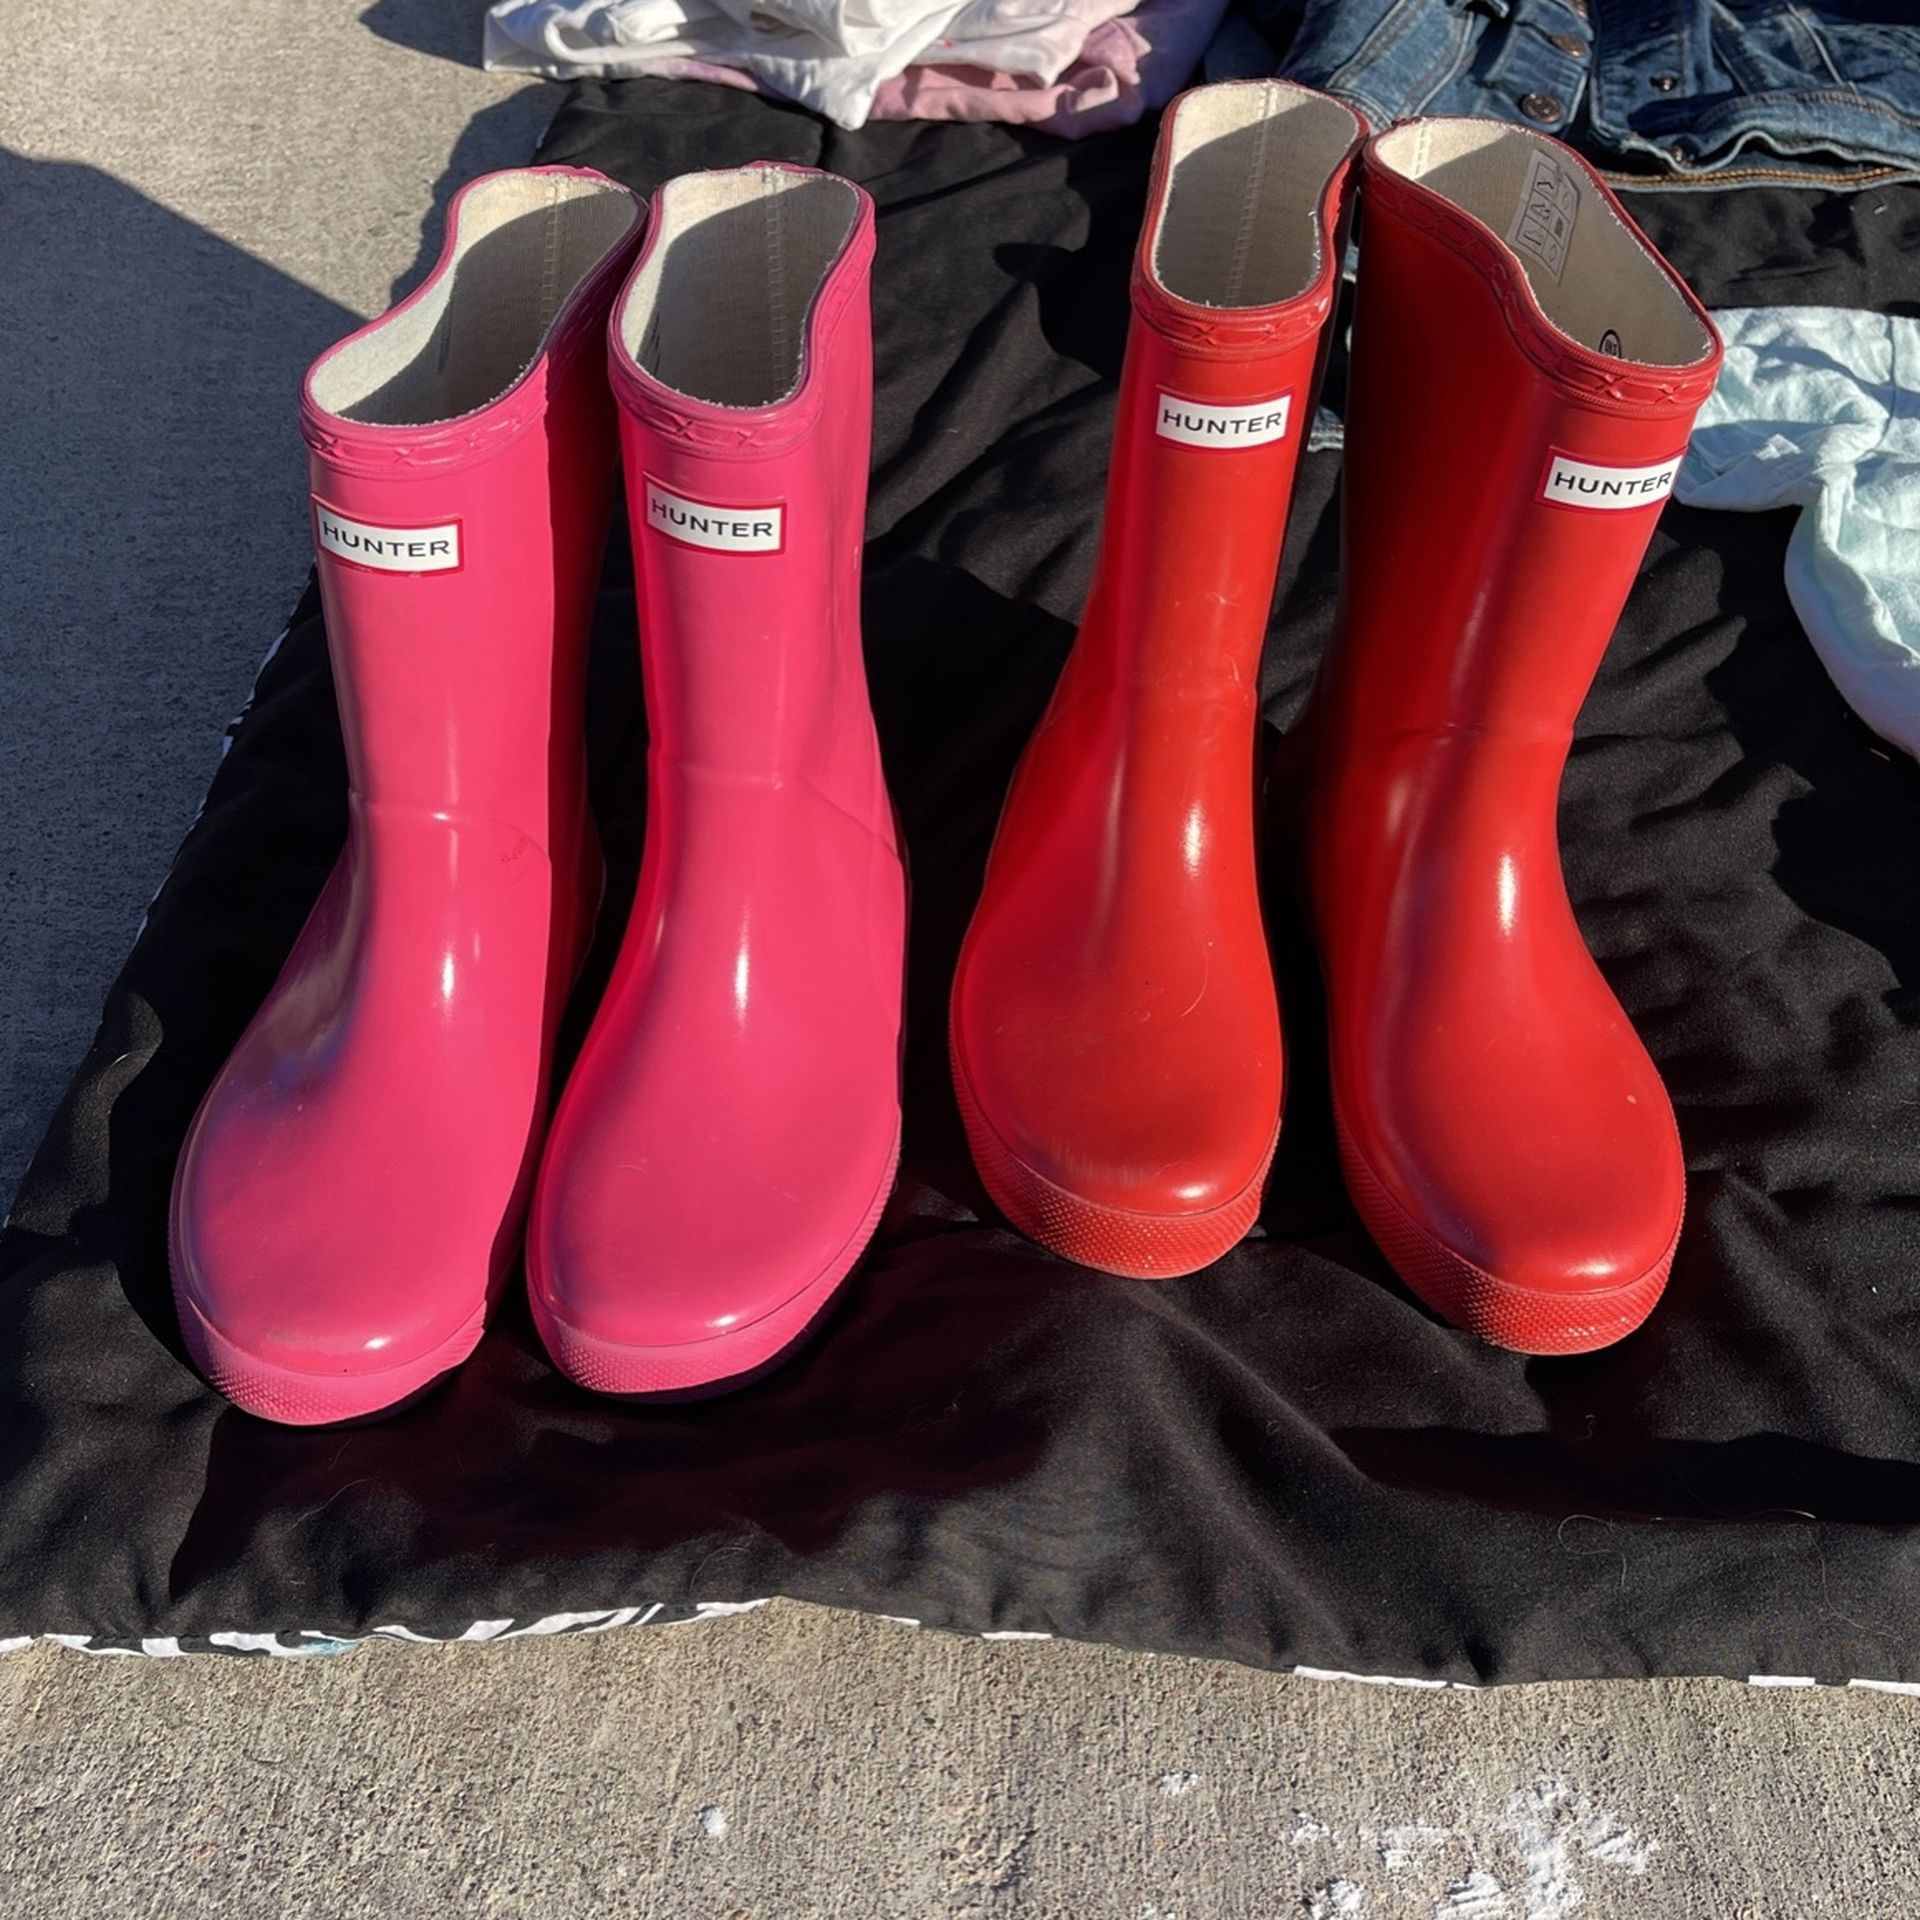 Two Pairs Of Hunter Rain Boots